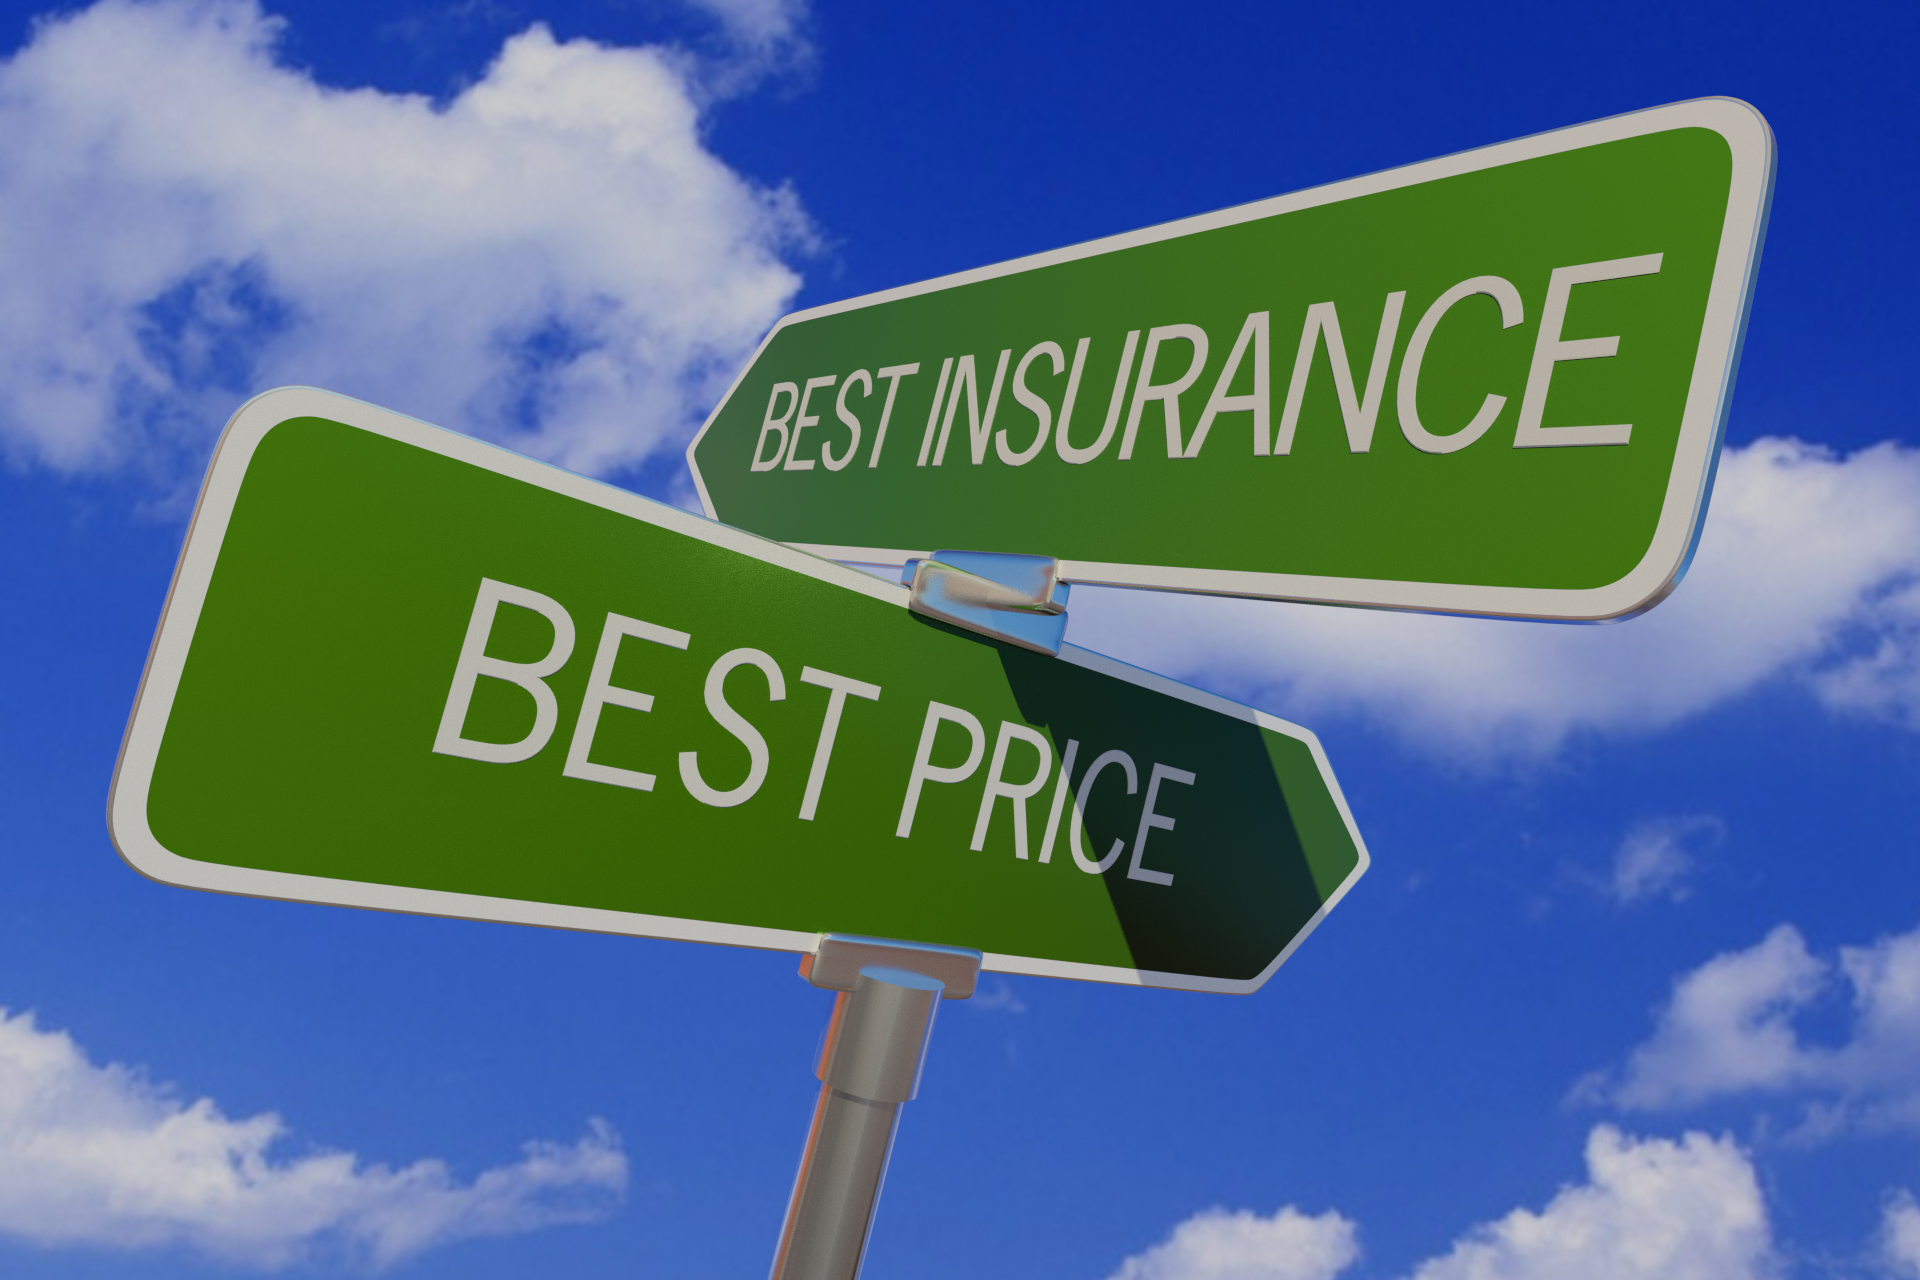 Best insurance best price sign free image download